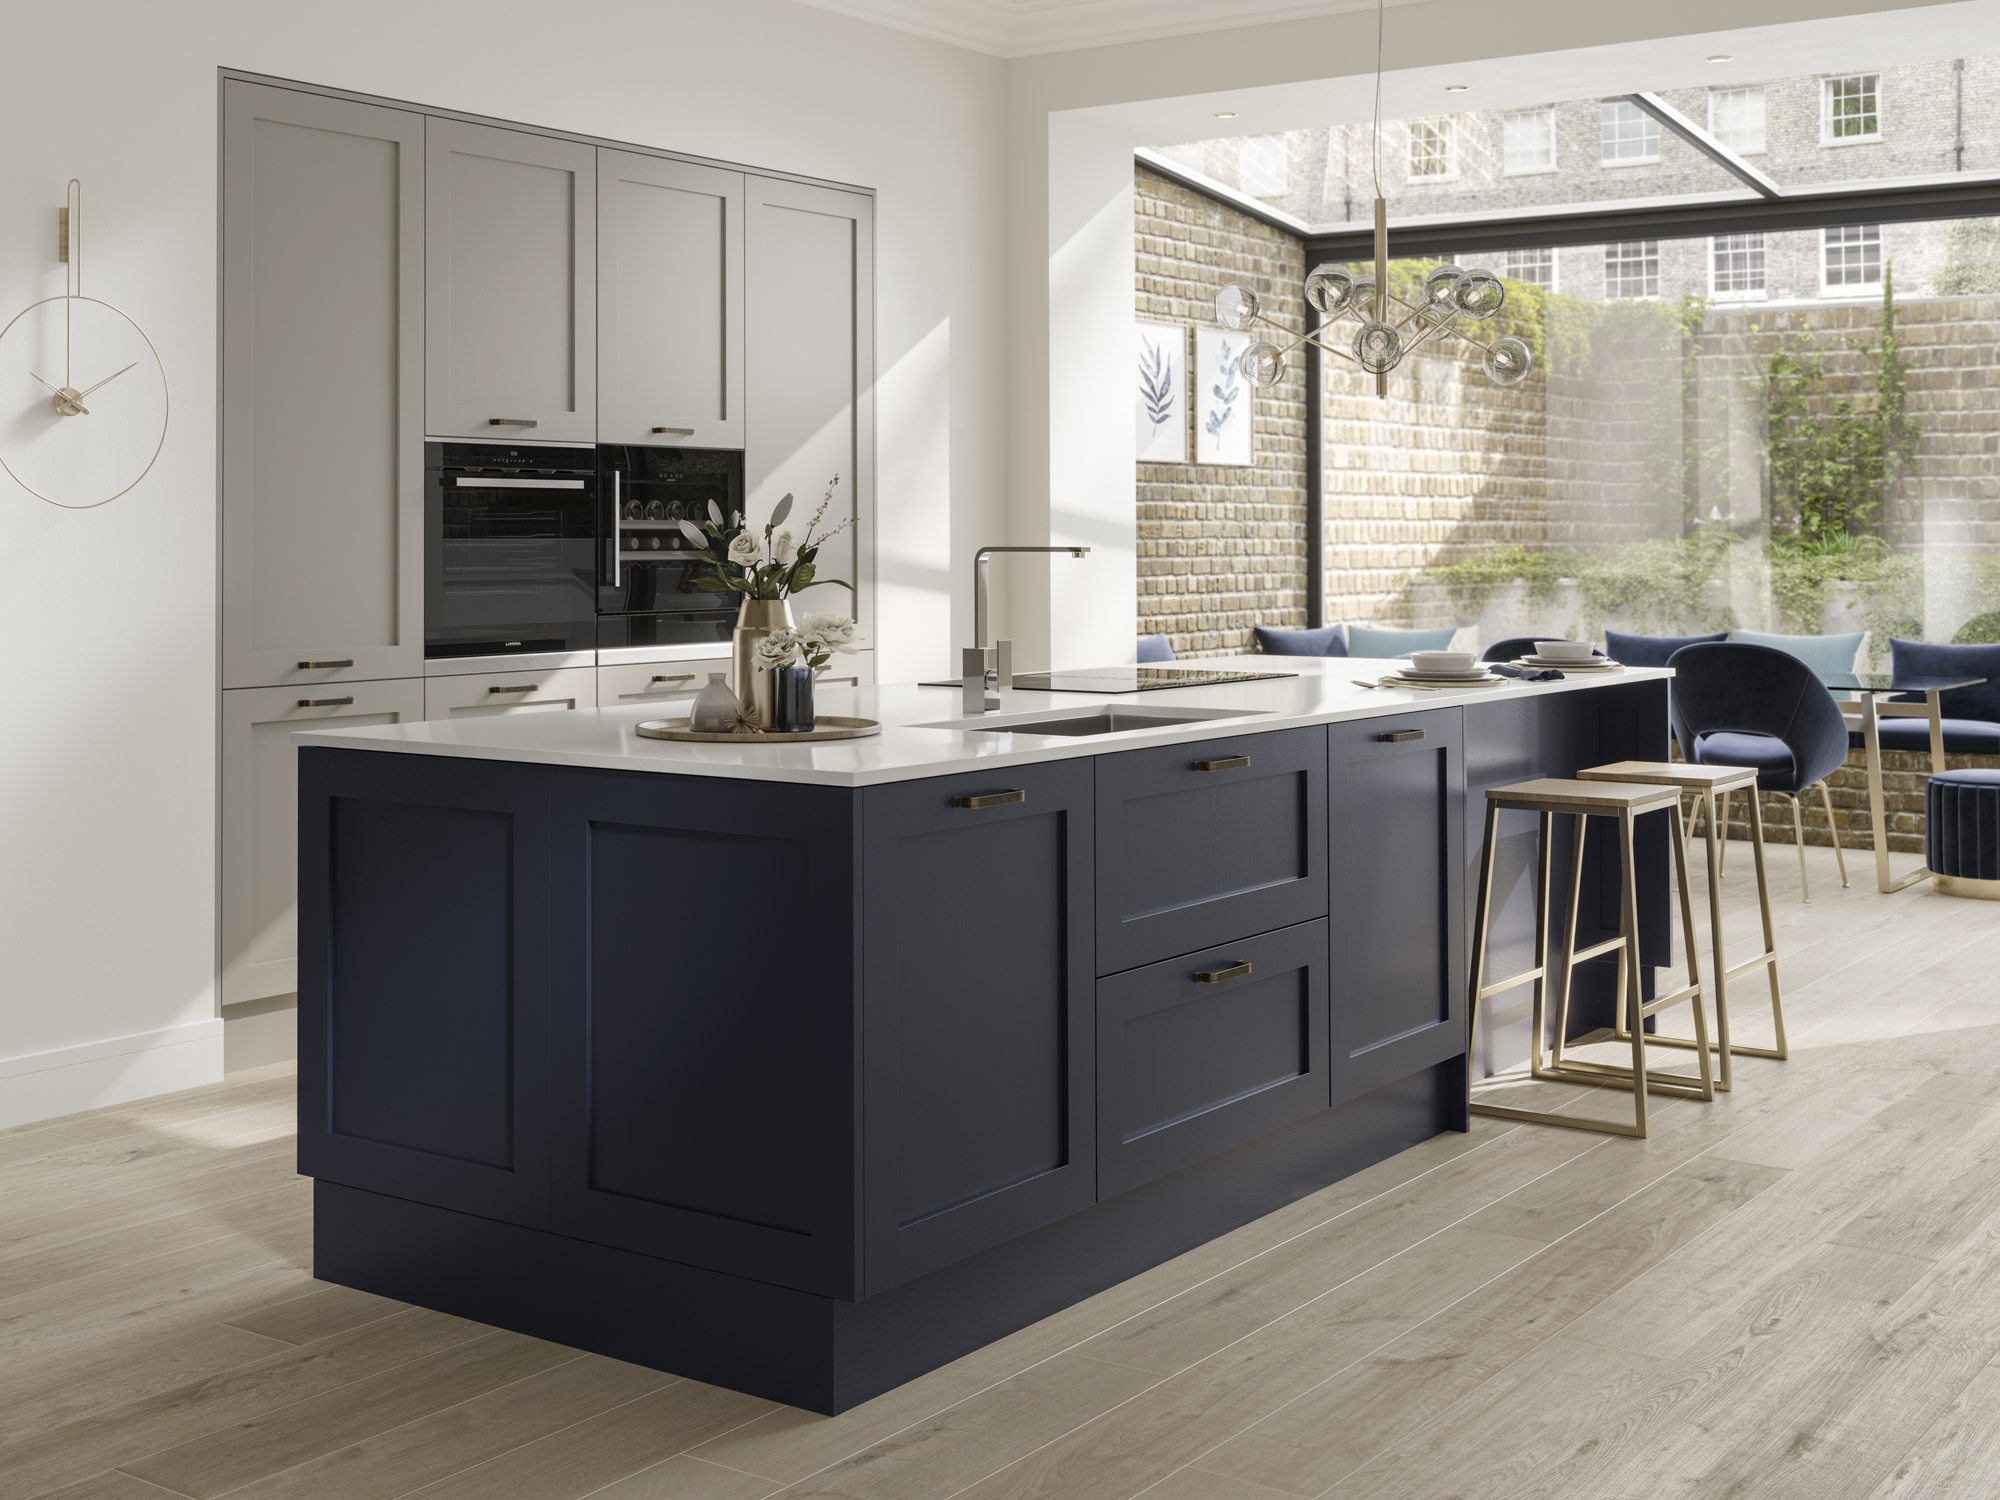 Kitchens How To Get One For, How Much Does A Kitchen Designer Earn Uk